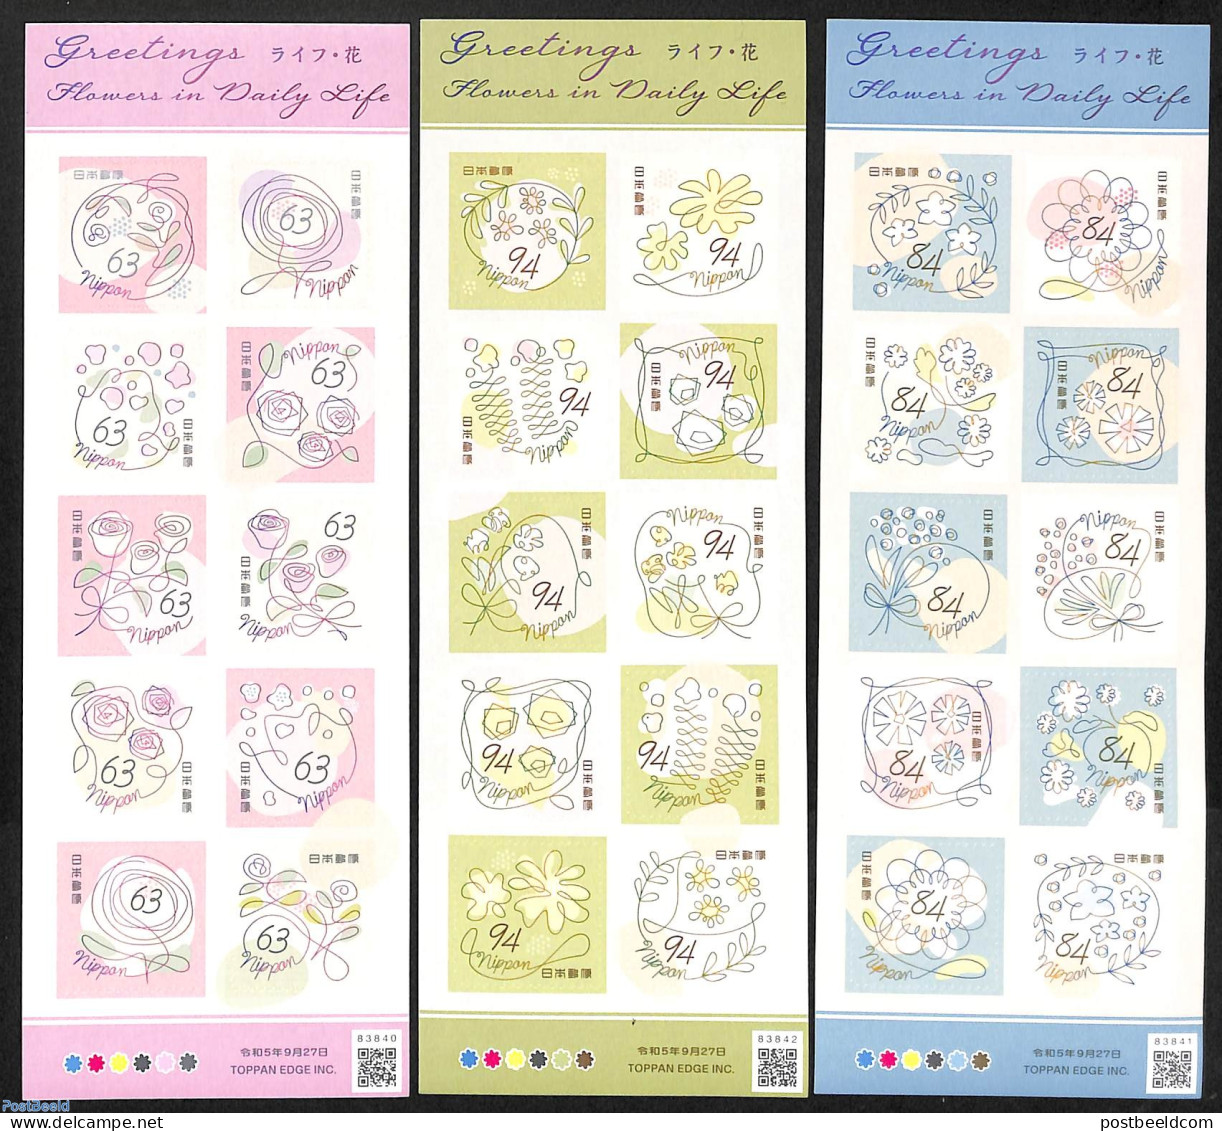 Japan 2023 Wishing Stamps 30v (3 M/s) S-a, Mint NH, Nature - Flowers & Plants - Nuevos